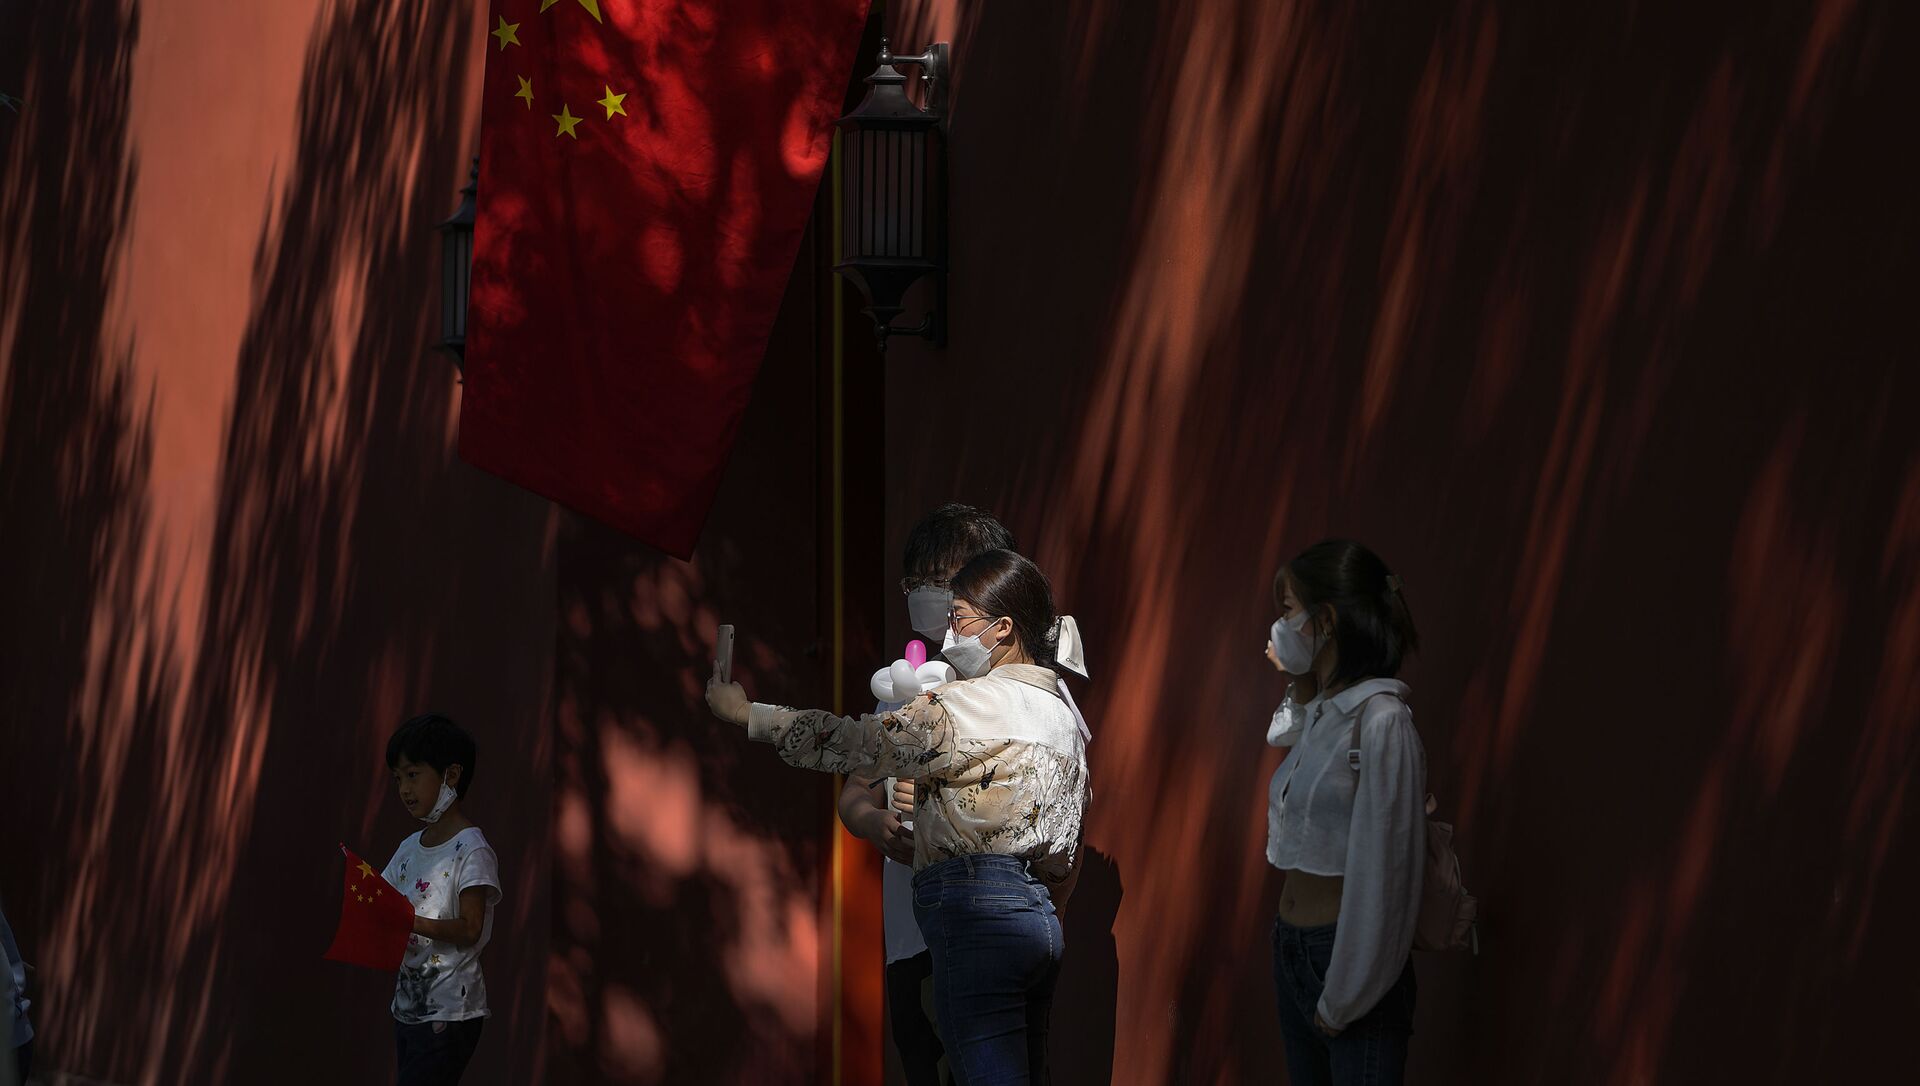 A couple wearing face masks to help protect from the coronavirus pose for a selfie near a national flag on a wall cast with shadows from trees on National Day in Beijing, Friday, Oct. 1, 2021. Hundreds of thousands domestic tourists flock to the square to celebrate the 72nd National Day of the People's Republic of China over a week-long holiday. (AP Photo/Andy Wong) - 俄罗斯卫星通讯社, 1920, 02.10.2021